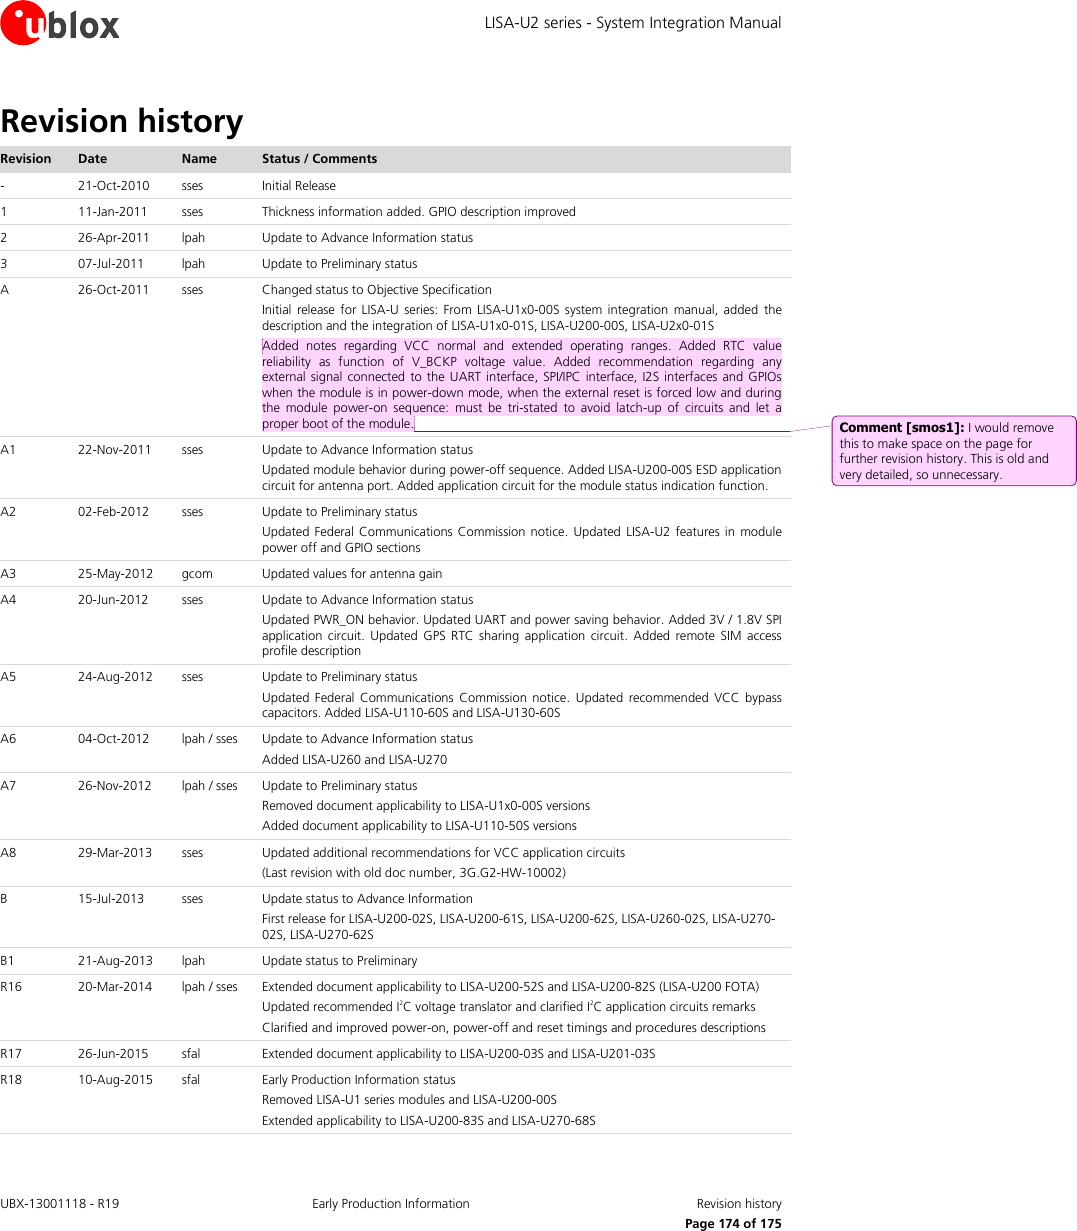 LISA-U2 series - System Integration Manual UBX-13001118 - R19  Early Production Information  Revision history      Page 174 of 175 Revision history Revision Date Name Status / Comments - 21-Oct-2010 sses Initial Release 1 11-Jan-2011 sses Thickness information added. GPIO description improved 2 26-Apr-2011 lpah Update to Advance Information status 3 07-Jul-2011 lpah Update to Preliminary status A 26-Oct-2011 sses Changed status to Objective Specification  Initial  release  for  LISA-U series:  From LISA-U1x0-00S system  integration  manual,  added  the description and the integration of LISA-U1x0-01S, LISA-U200-00S, LISA-U2x0-01S Added  notes  regarding  VCC  normal  and  extended  operating  ranges.  Added  RTC  value reliability  as  function  of  V_BCKP  voltage  value.  Added  recommendation  regarding  any external signal connected to the UART interface, SPI/IPC interface, I2S  interfaces and GPIOs when the module is in power-down mode, when the external reset is forced low and during the  module  power-on  sequence:  must  be  tri-stated  to  avoid  latch-up  of  circuits  and  let  a proper boot of the module. A1 22-Nov-2011 sses Update to Advance Information status Updated module behavior during power-off sequence. Added LISA-U200-00S ESD application circuit for antenna port. Added application circuit for the module status indication function. A2 02-Feb-2012 sses Update to Preliminary status Updated Federal Communications Commission notice. Updated  LISA-U2  features in module power off and GPIO sections A3 25-May-2012 gcom Updated values for antenna gain A4 20-Jun-2012 sses Update to Advance Information status Updated PWR_ON behavior. Updated UART and power saving behavior. Added 3V / 1.8V SPI application circuit.  Updated  GPS  RTC sharing  application  circuit.  Added  remote  SIM access profile description A5 24-Aug-2012 sses Update to Preliminary status Updated Federal  Communications  Commission  notice. Updated  recommended  VCC  bypass capacitors. Added LISA-U110-60S and LISA-U130-60S  A6 04-Oct-2012 lpah / sses Update to Advance Information status Added LISA-U260 and LISA-U270 A7 26-Nov-2012 lpah / sses Update to Preliminary status Removed document applicability to LISA-U1x0-00S versions Added document applicability to LISA-U110-50S versions A8 29-Mar-2013 sses Updated additional recommendations for VCC application circuits (Last revision with old doc number, 3G.G2-HW-10002) B 15-Jul-2013 sses Update status to Advance Information  First release for LISA-U200-02S, LISA-U200-61S, LISA-U200-62S, LISA-U260-02S, LISA-U270-02S, LISA-U270-62S B1 21-Aug-2013 lpah Update status to Preliminary R16 20-Mar-2014 lpah / sses Extended document applicability to LISA-U200-52S and LISA-U200-82S (LISA-U200 FOTA) Updated recommended I2C voltage translator and clarified I2C application circuits remarks Clarified and improved power-on, power-off and reset timings and procedures descriptions R17 26-Jun-2015 sfal Extended document applicability to LISA-U200-03S and LISA-U201-03S R18 10-Aug-2015 sfal Early Production Information status Removed LISA-U1 series modules and LISA-U200-00S Extended applicability to LISA-U200-83S and LISA-U270-68S Comment [smos1]: I would remove this to make space on the page for further revision history. This is old and very detailed, so unnecessary. 